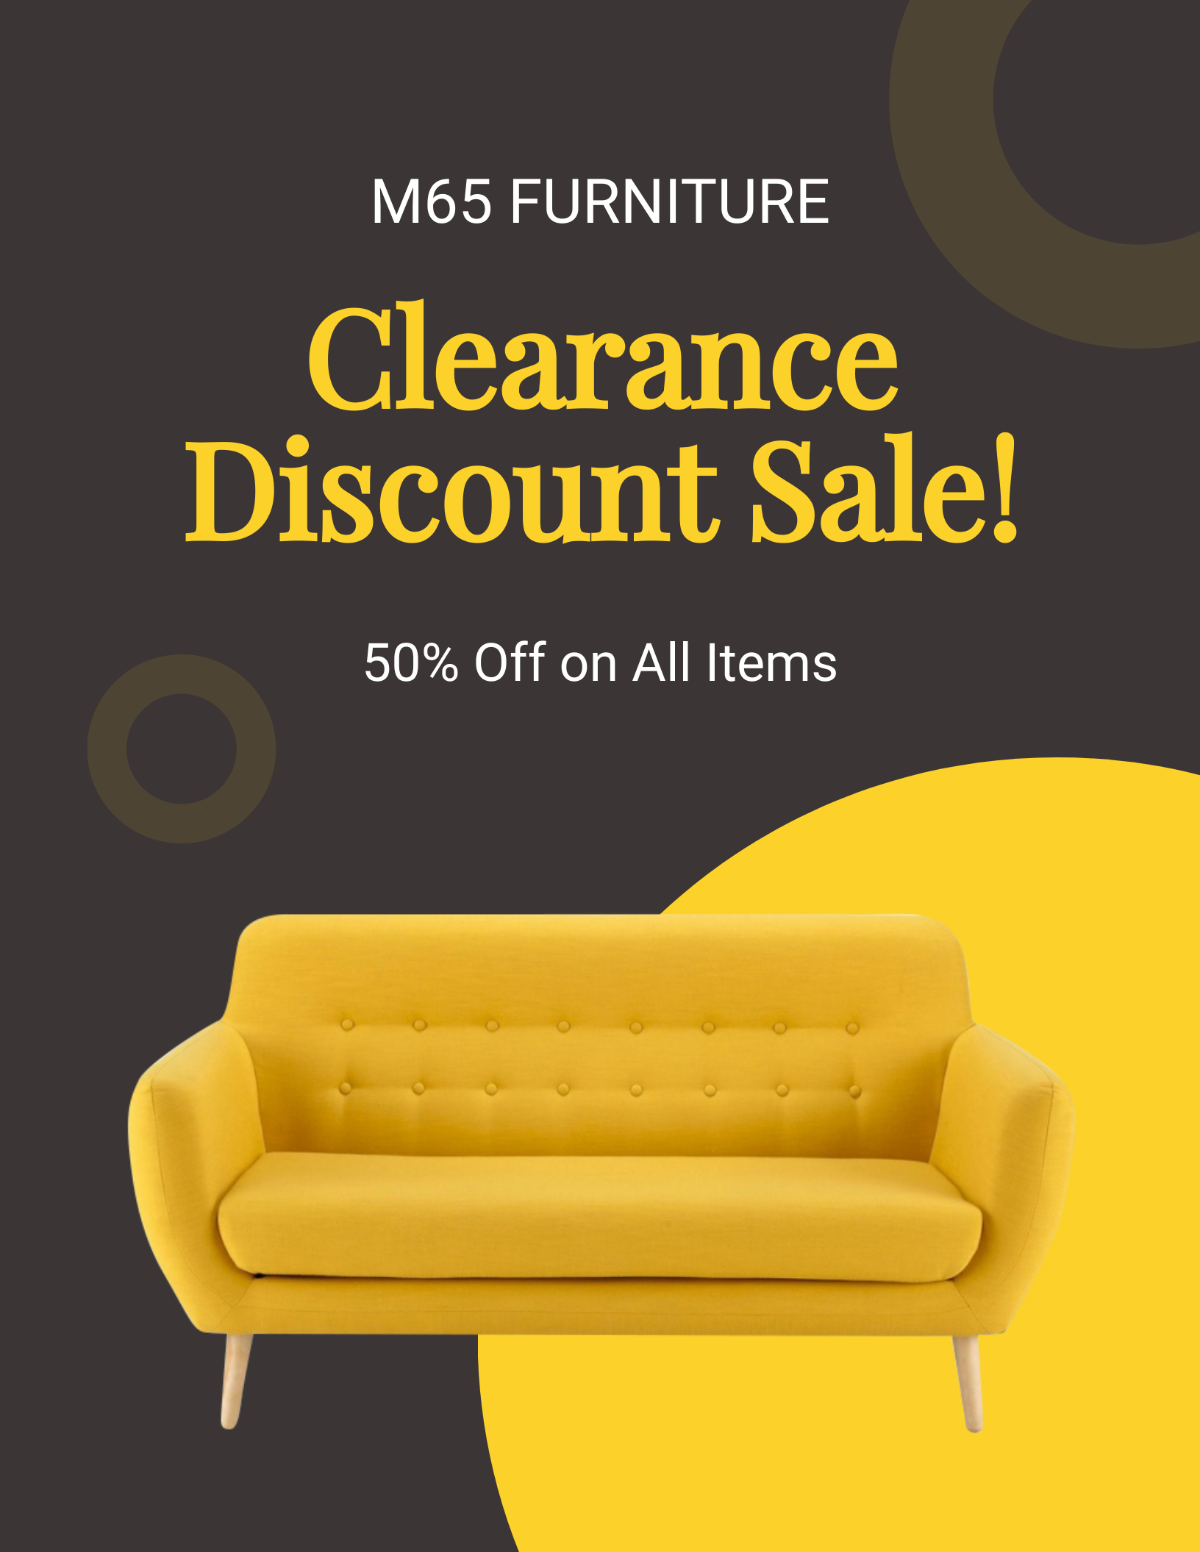 Clearance Discount Sale Flyer Template